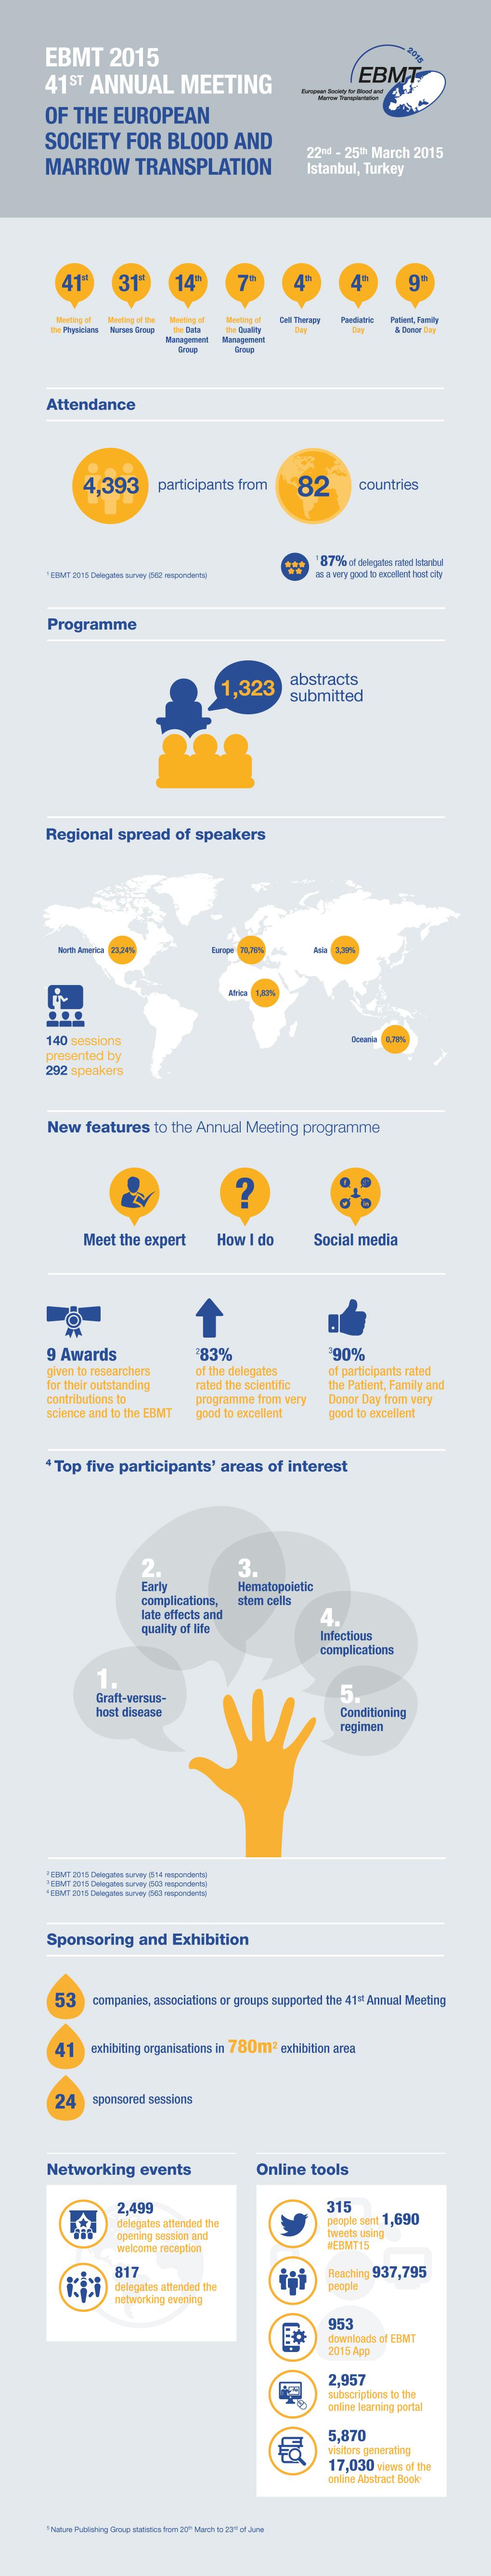 Infographic Report Annual Meeting EBMT 2015